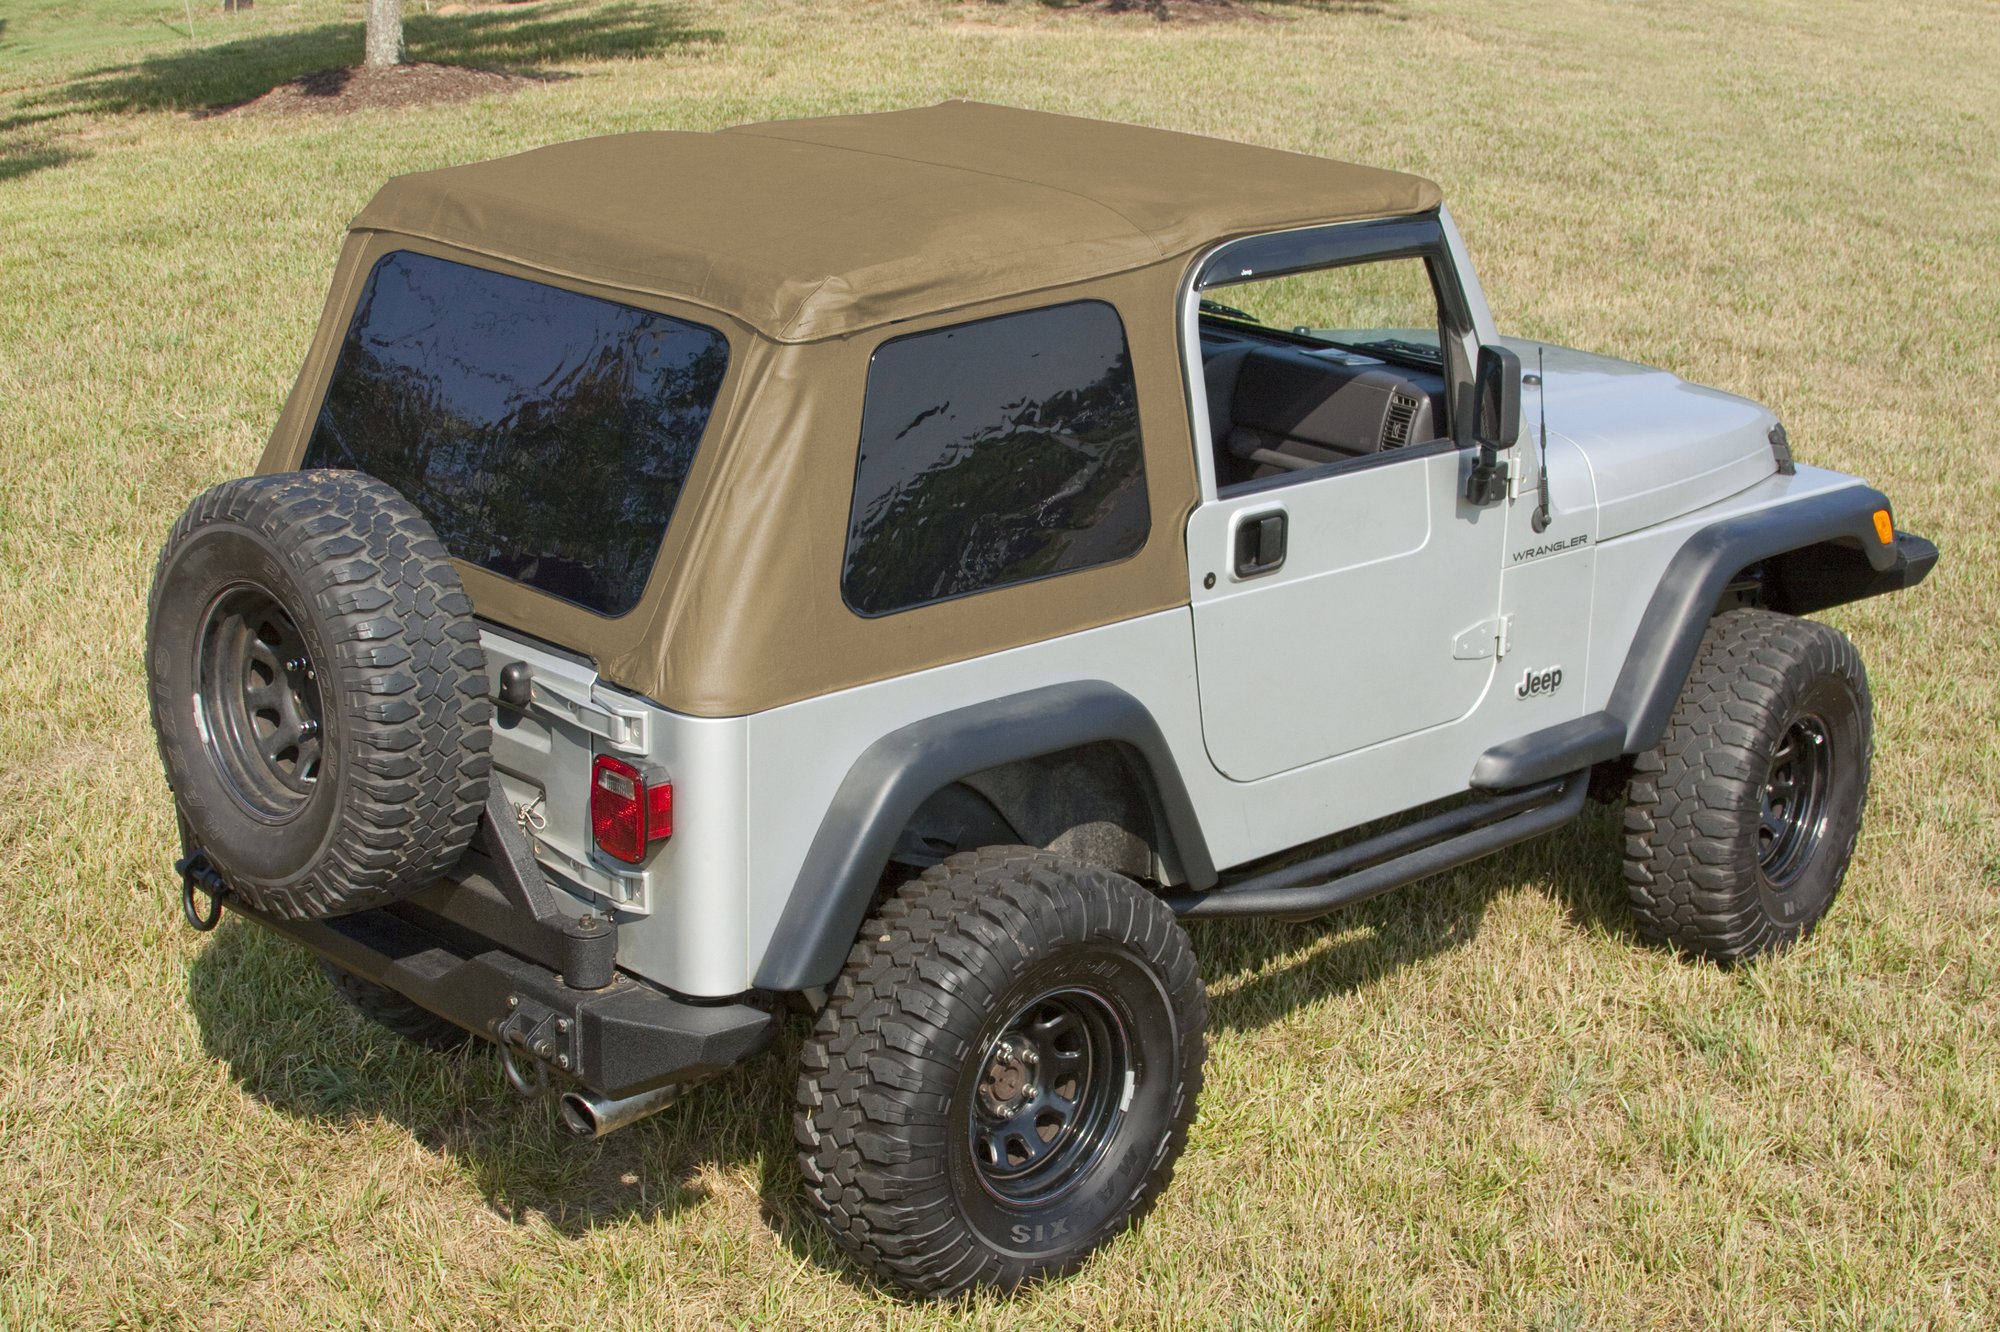 Rugged Ridge XHD Bowless Soft Top for 9706 Jeep Wrangler